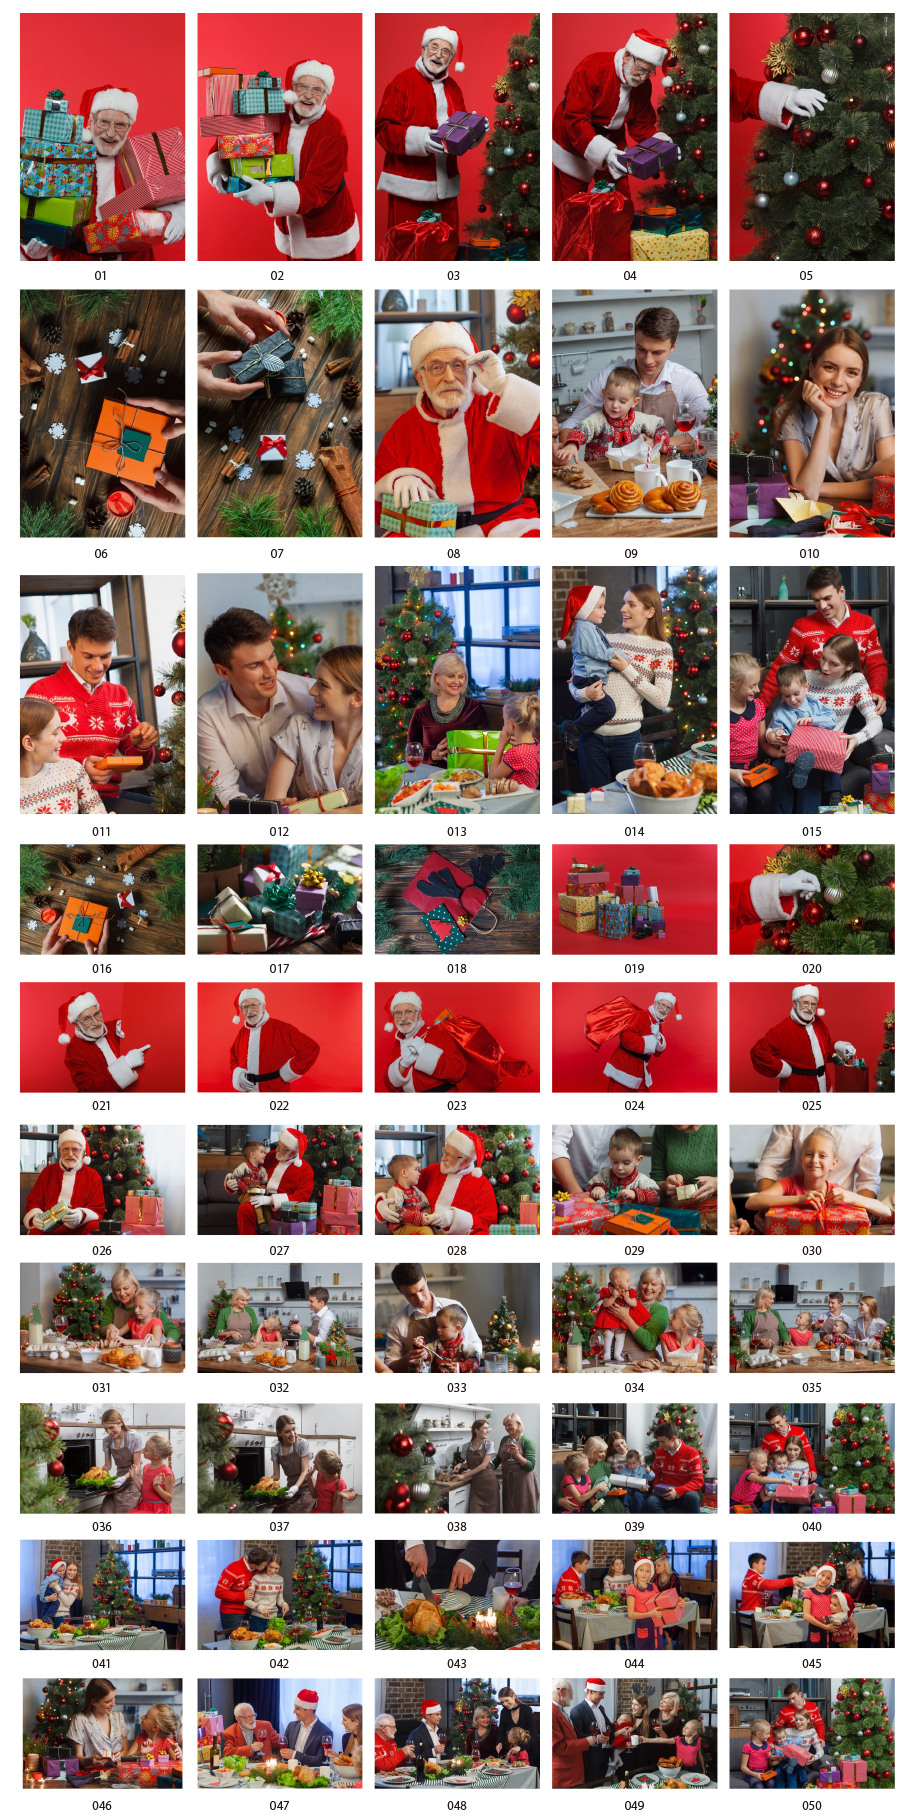 Photo material of Santa Claus and foreign family